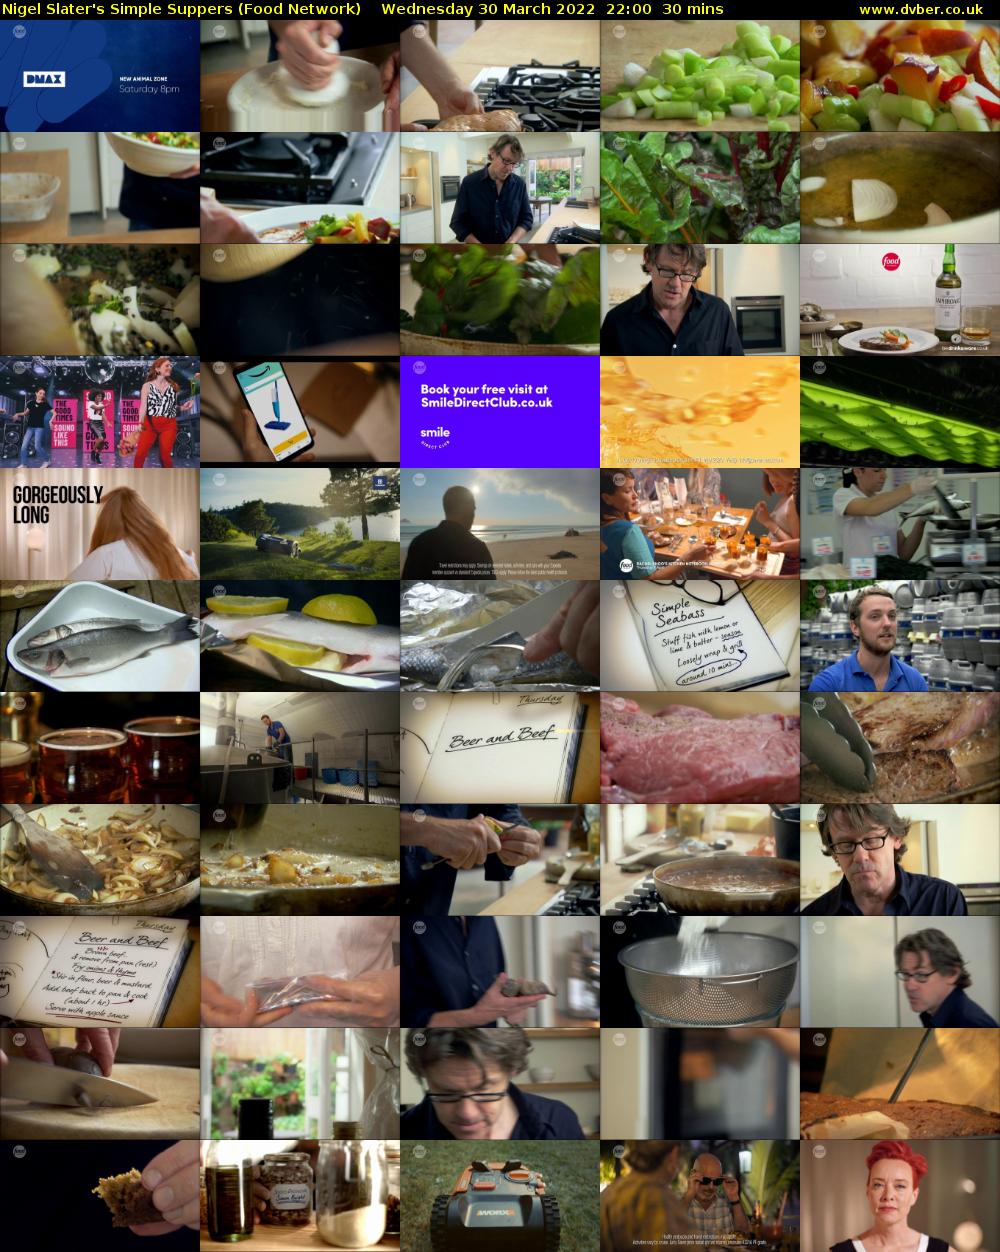 Nigel Slater's Simple Suppers (Food Network) Wednesday 30 March 2022 22:00 - 22:30